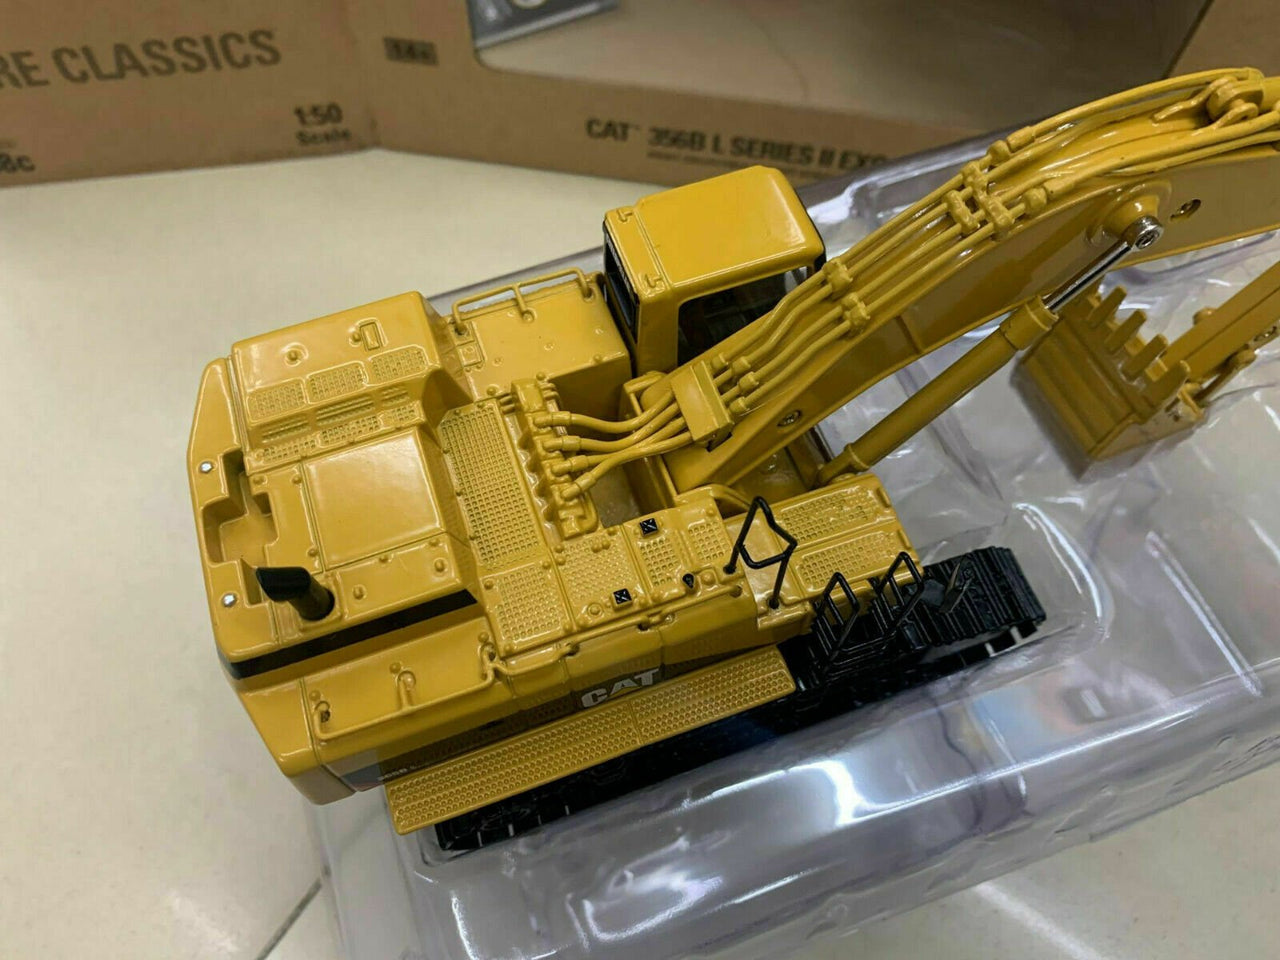 85058C Caterpillar 365BL Tracked Excavator Scale 1:50 (Discontinued Model)